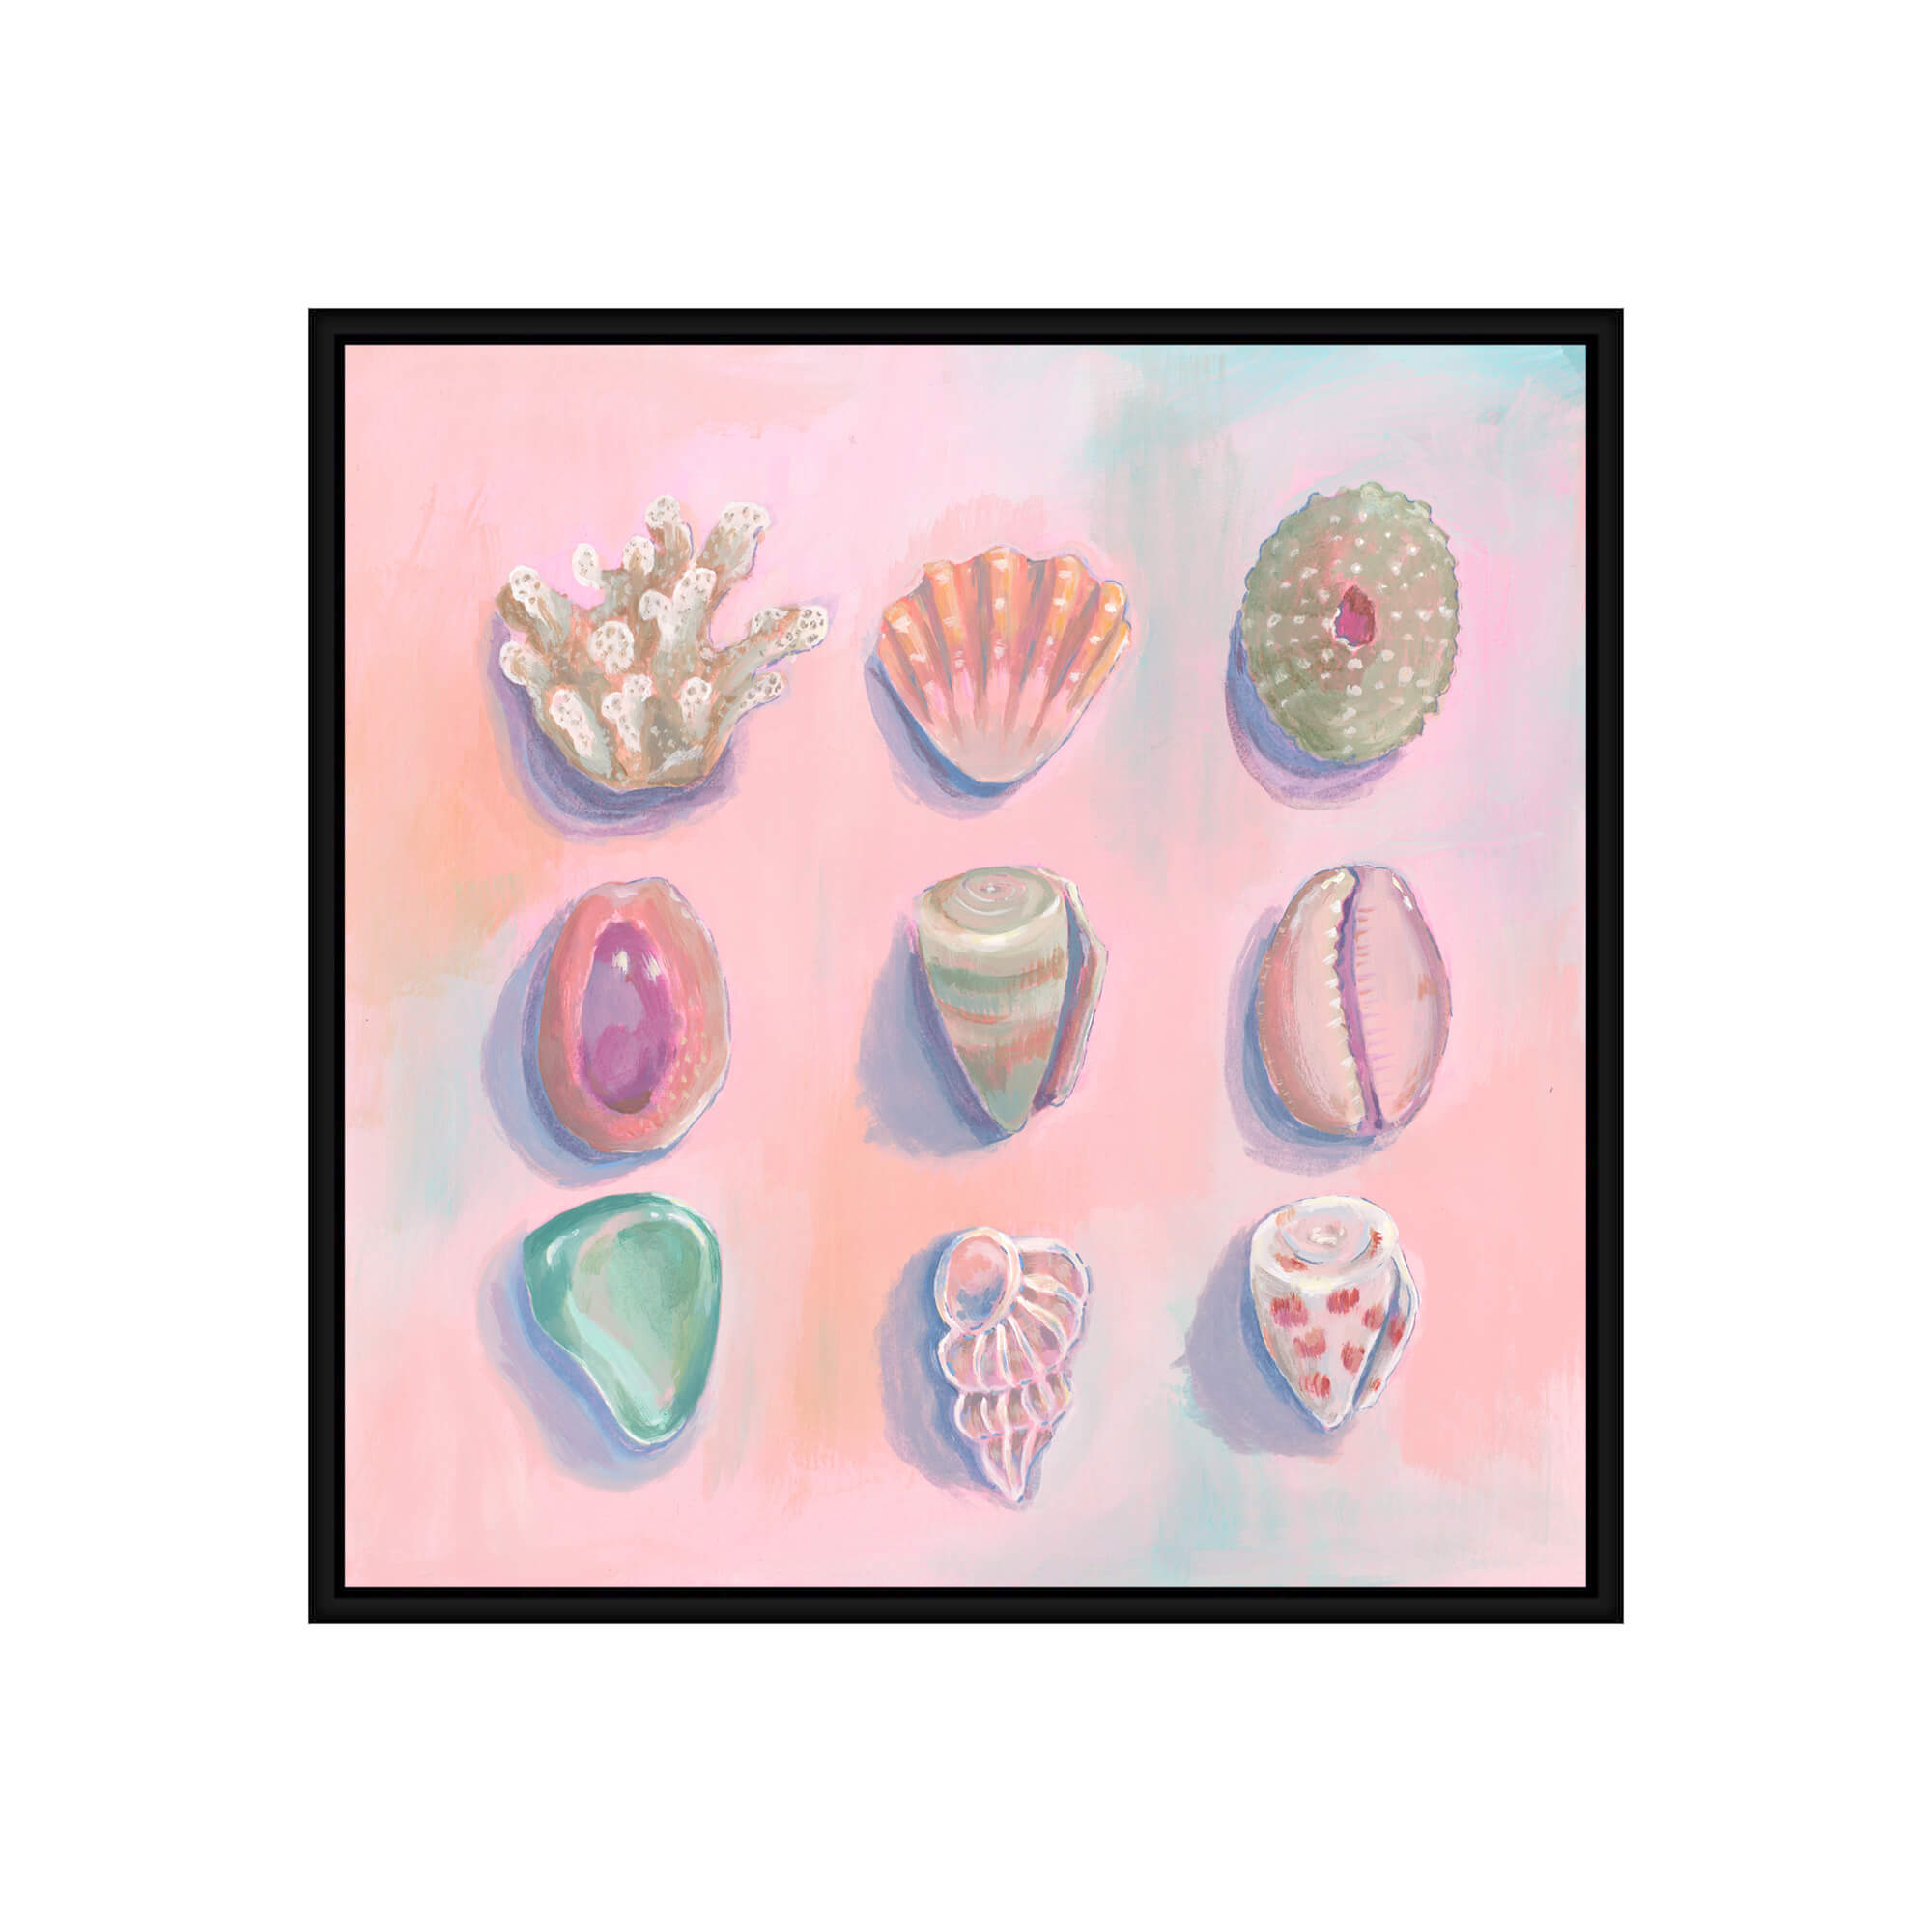 Seashells with different colors by Hawaii artist Lindsay Wilkins